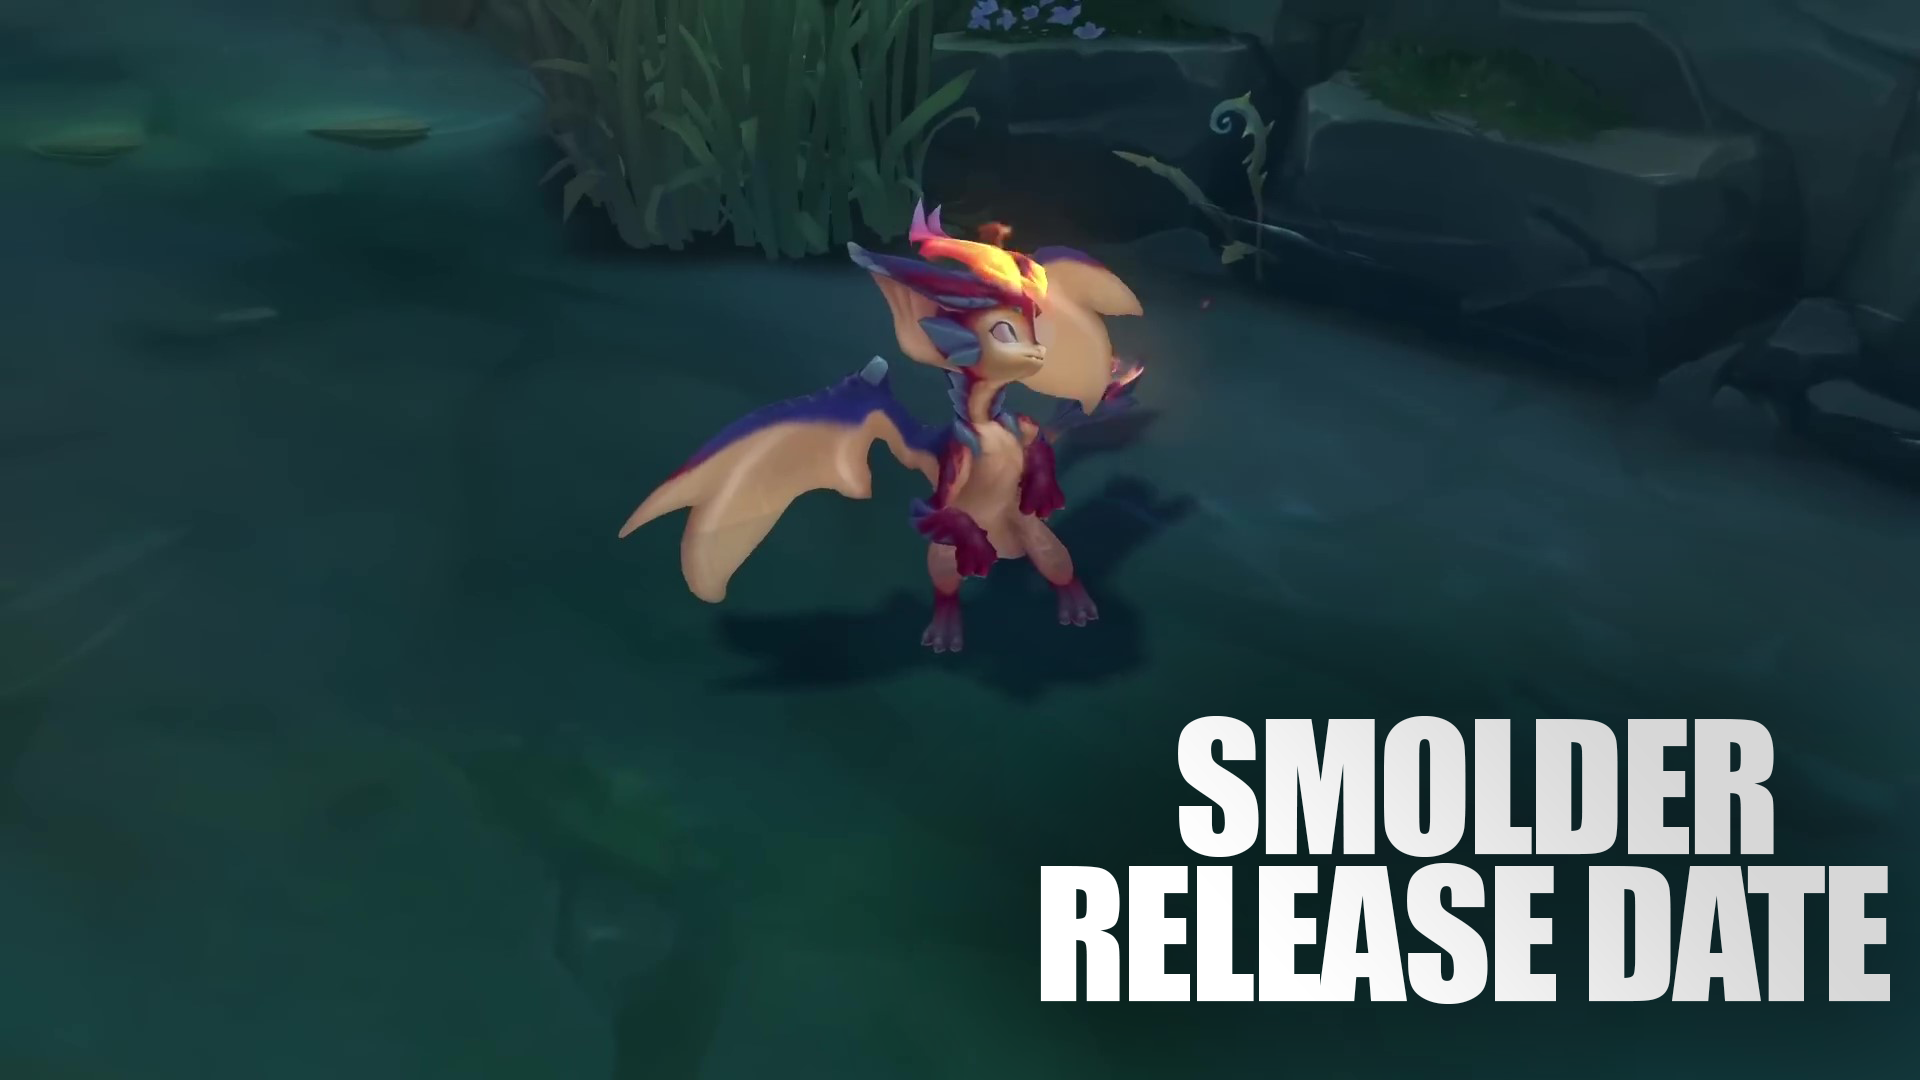 Smolder release date has been confirmed. Smolder will officially launch with patch 14.2 on January 23, 2024, bringing his fiery kit to the Rift.